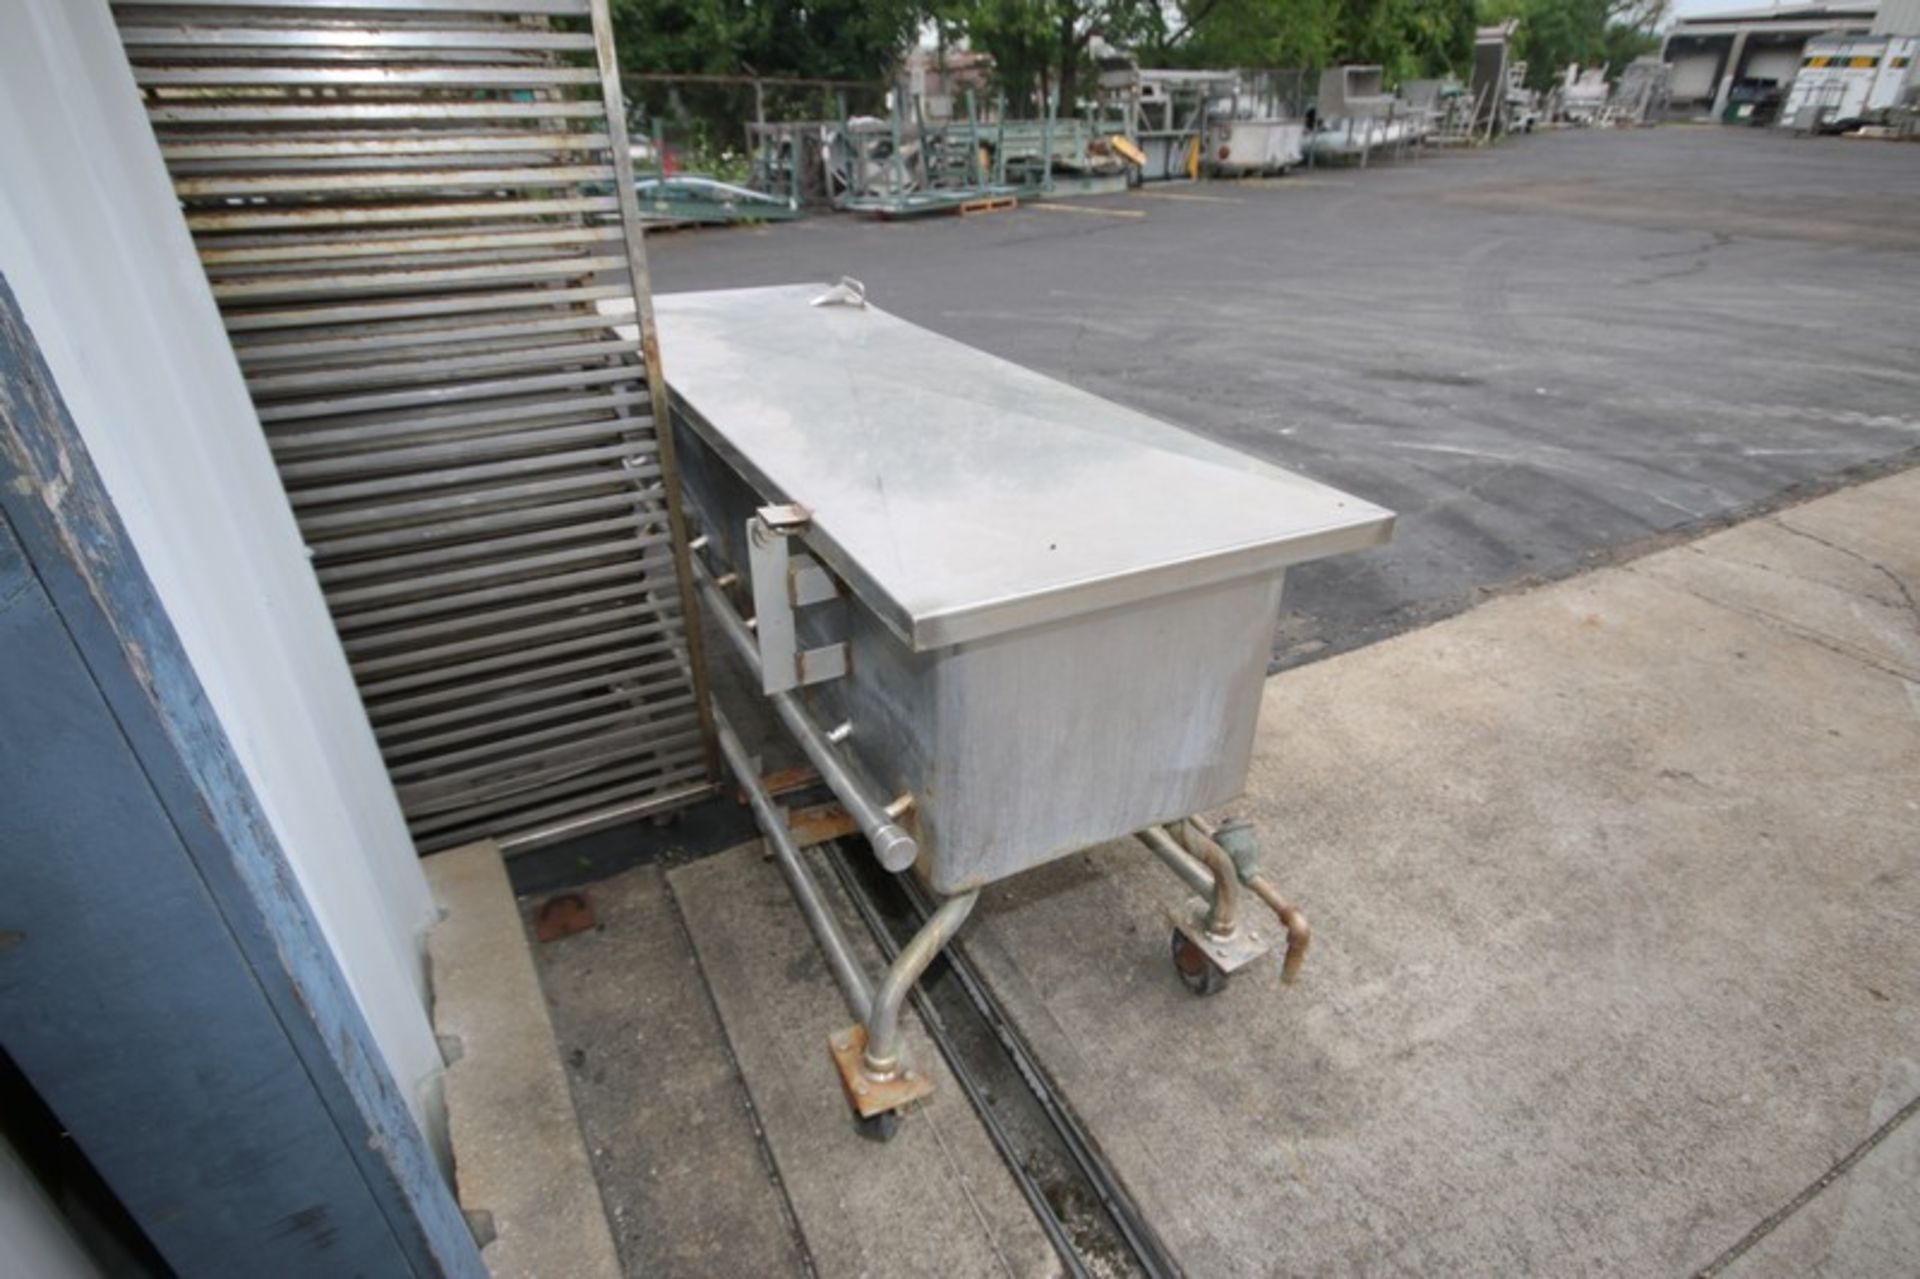 S/S Jet Spray COP Trough, with On Board Heat Exchanger, Overall Dims.: Aprox. 80" L x 38" W x 37" H - Image 4 of 6